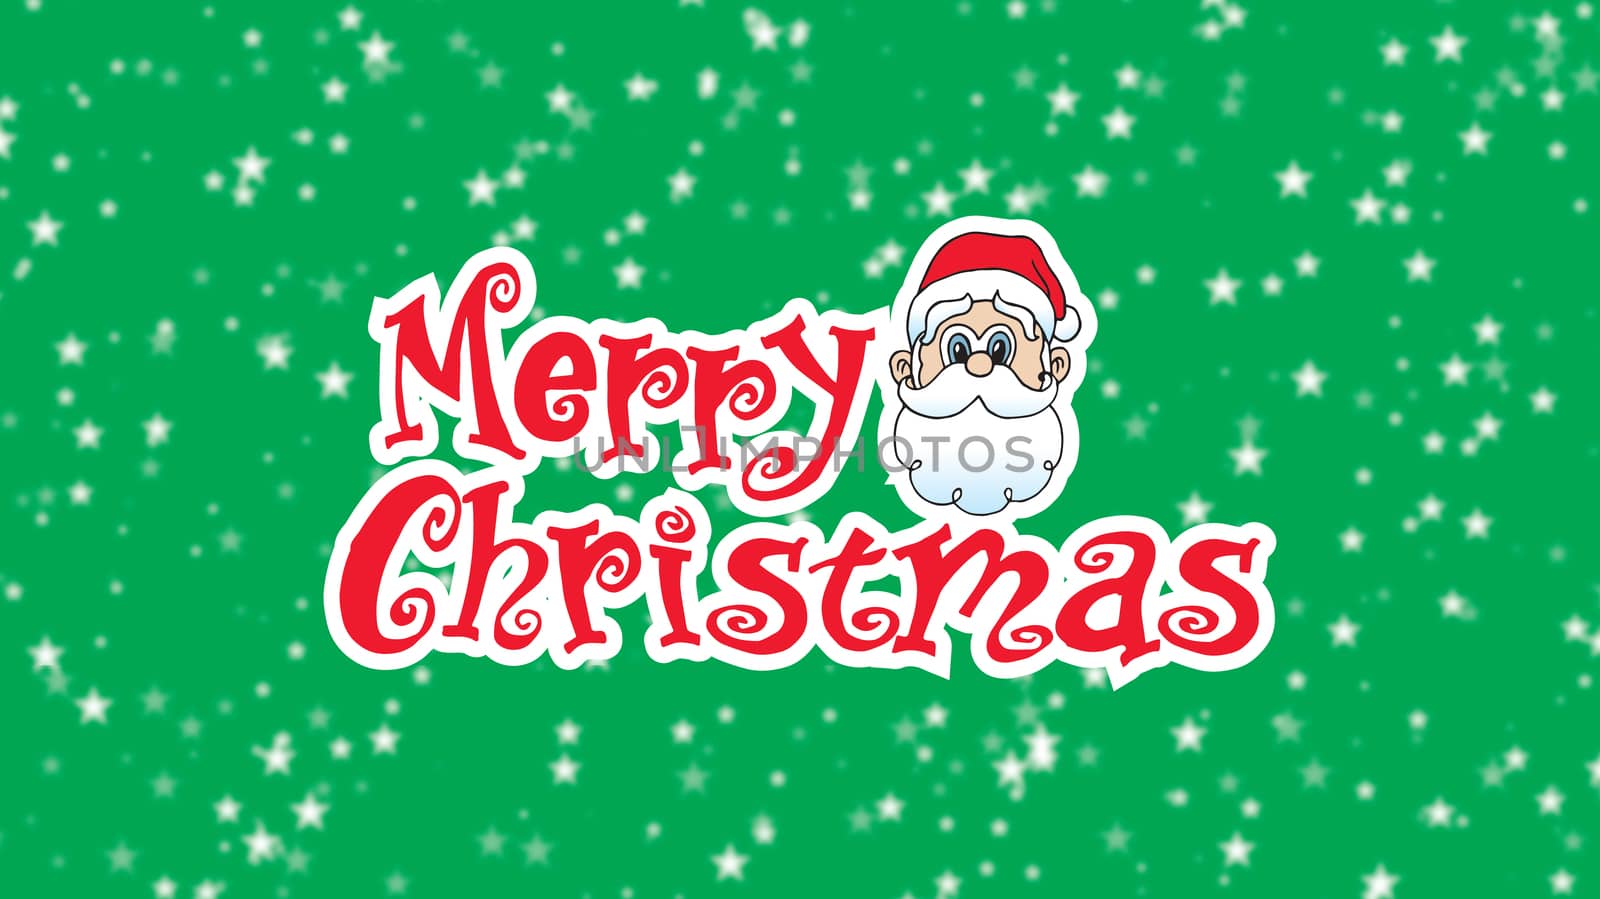 Merry Christmas12 Santa Head looking over Christmas Type on white background